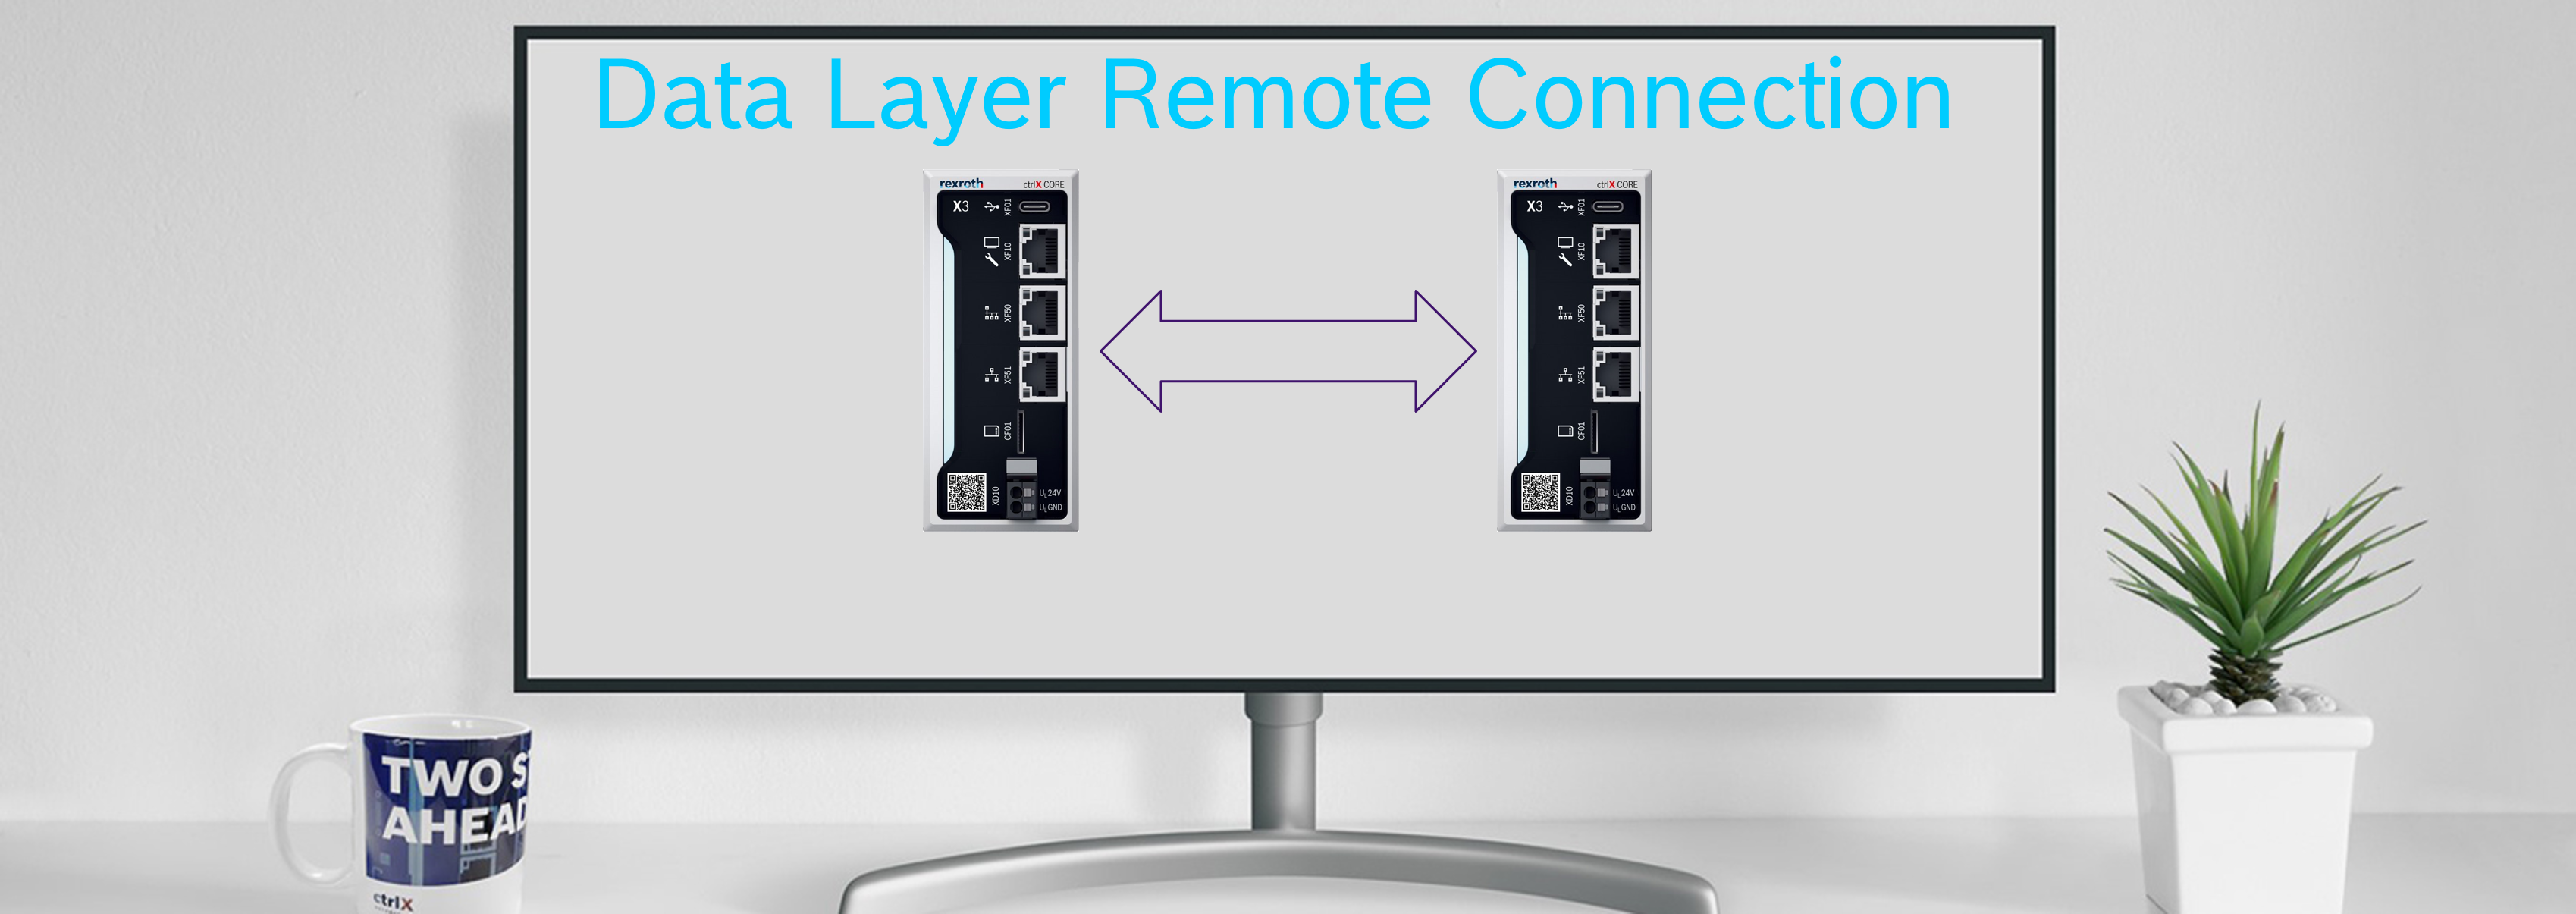 Data-Layer-Remote-Connection.png